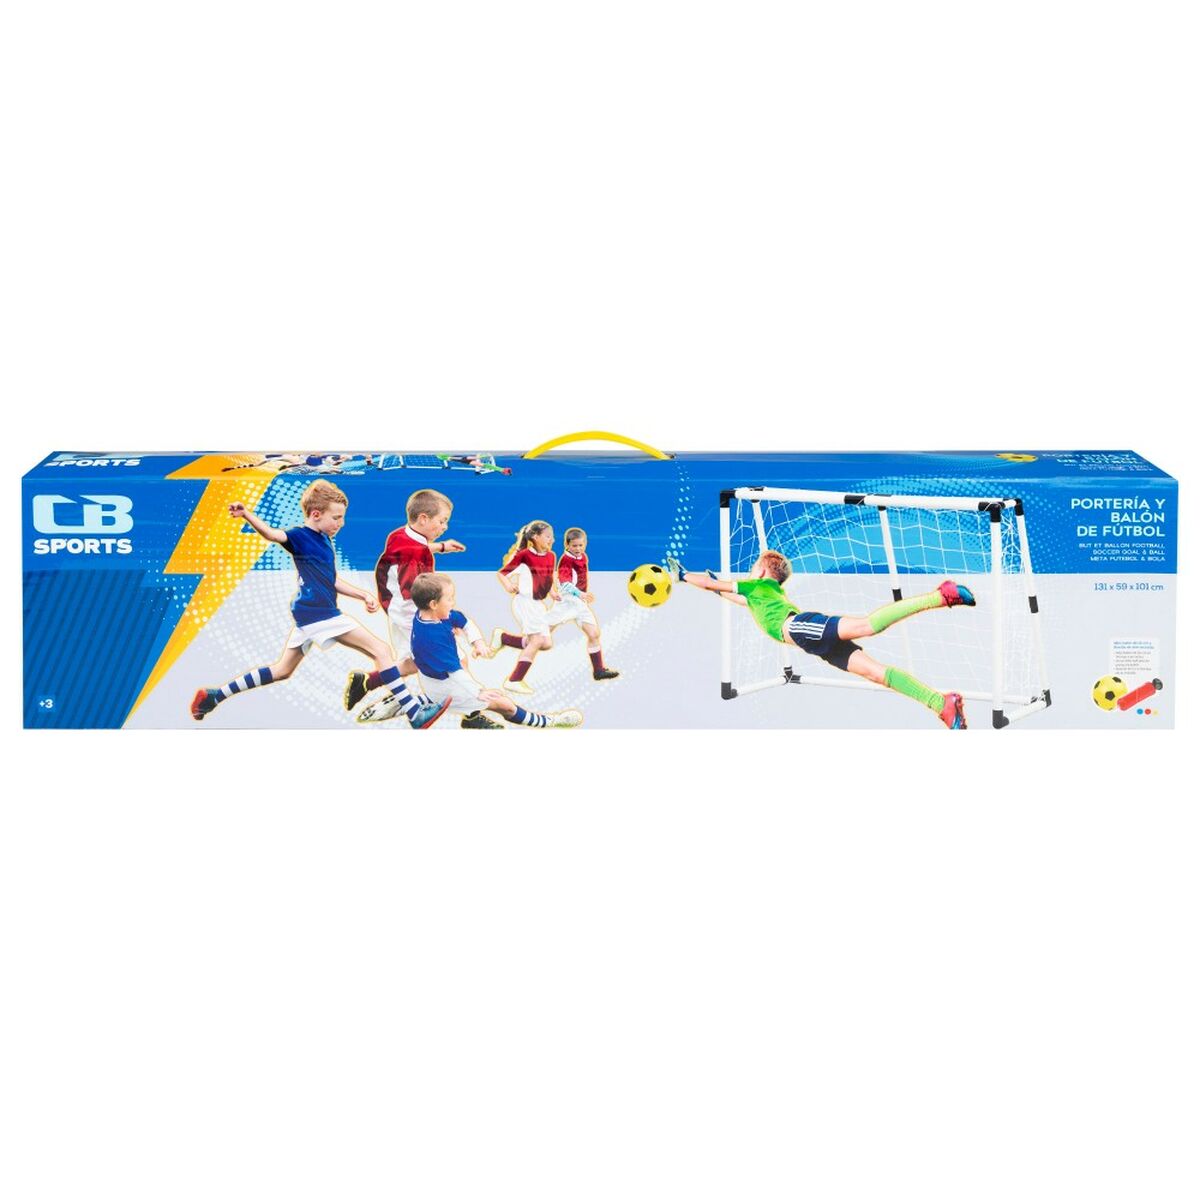 Football Goal Colorbaby 131 x 101 x 59 cm (2 Units)